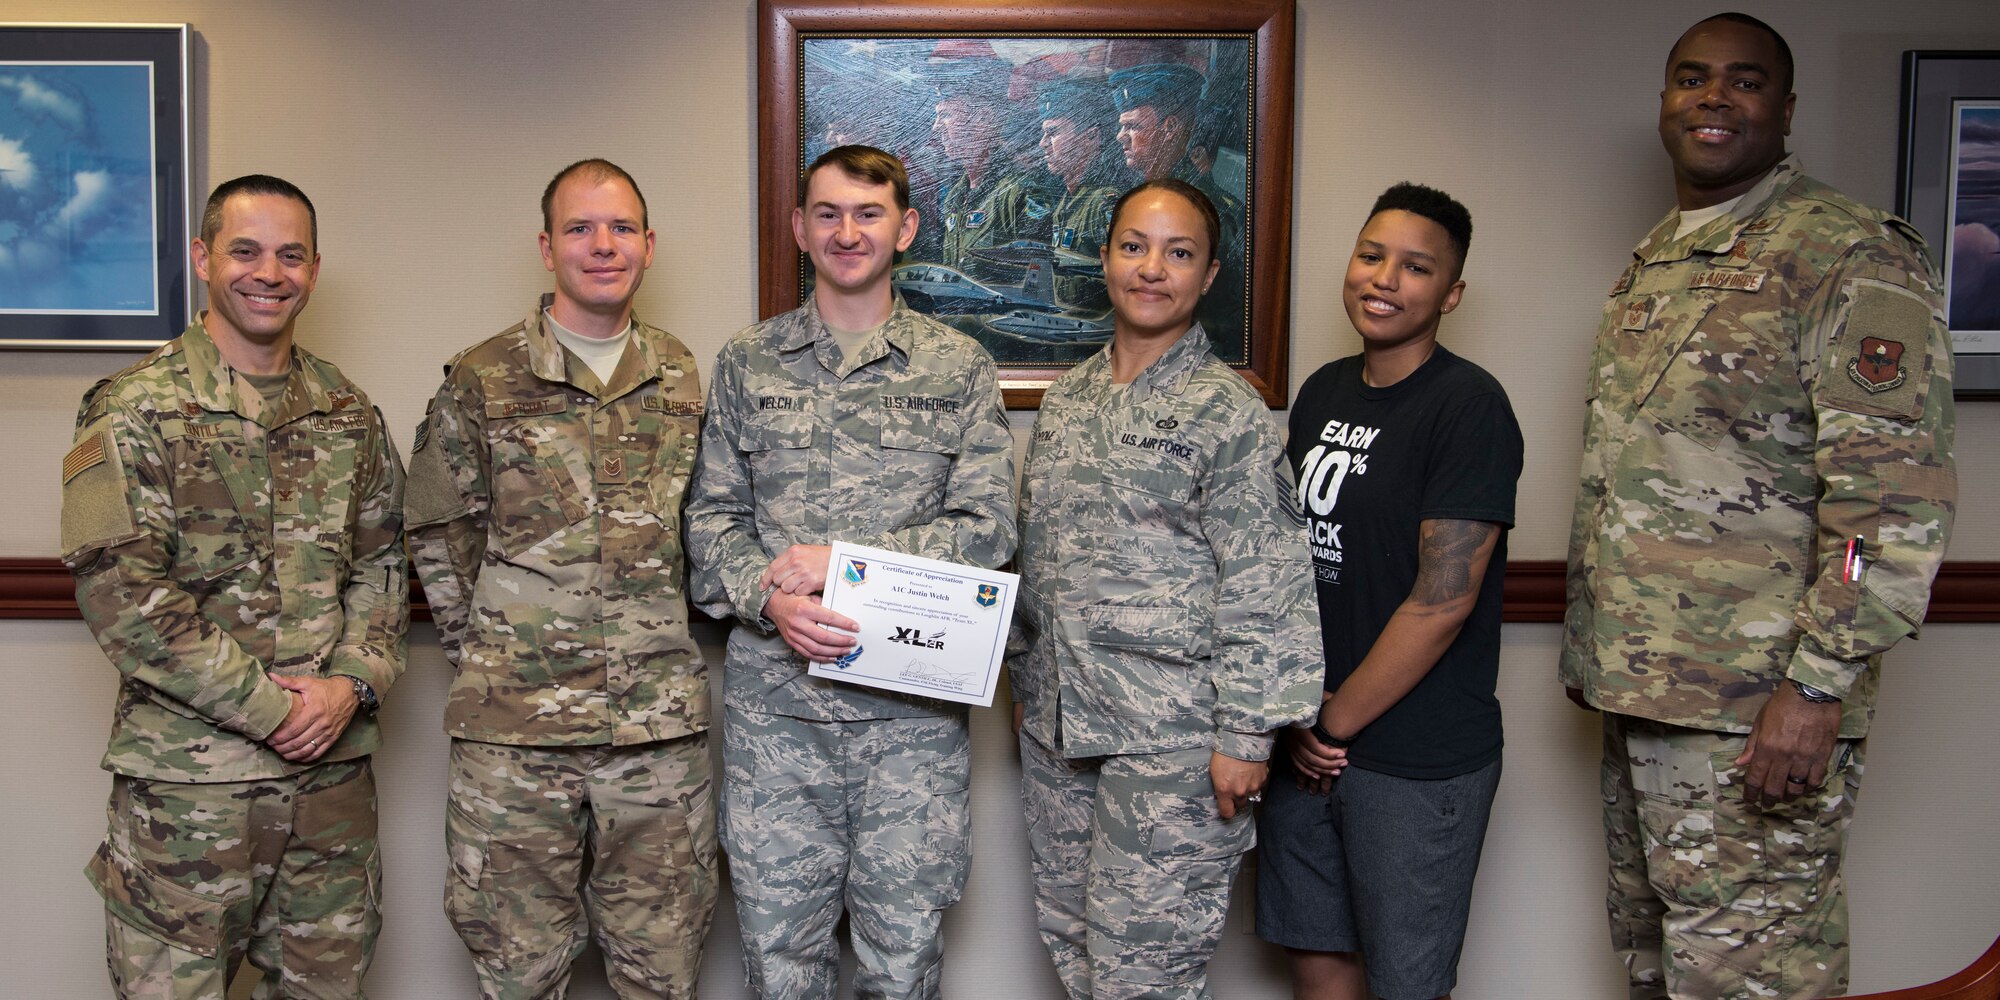 Airman 1st Class Justin Welch, 47th Flying Training Wing Command Post emergency actions controller, was chosen by wing leadership to be the “XLer” of the week, for the week of May 20, 2019, at Laughlin Air Force Base, Texas. The “XLer” award, presented by Col. Lee Gentile, 47th Flying Training Wing commander, is given to those who consistently make outstanding contributions to their unit and the Laughlin mission. (U.S. Air Force photo by Airman 1st Class Marco A. Gomez)